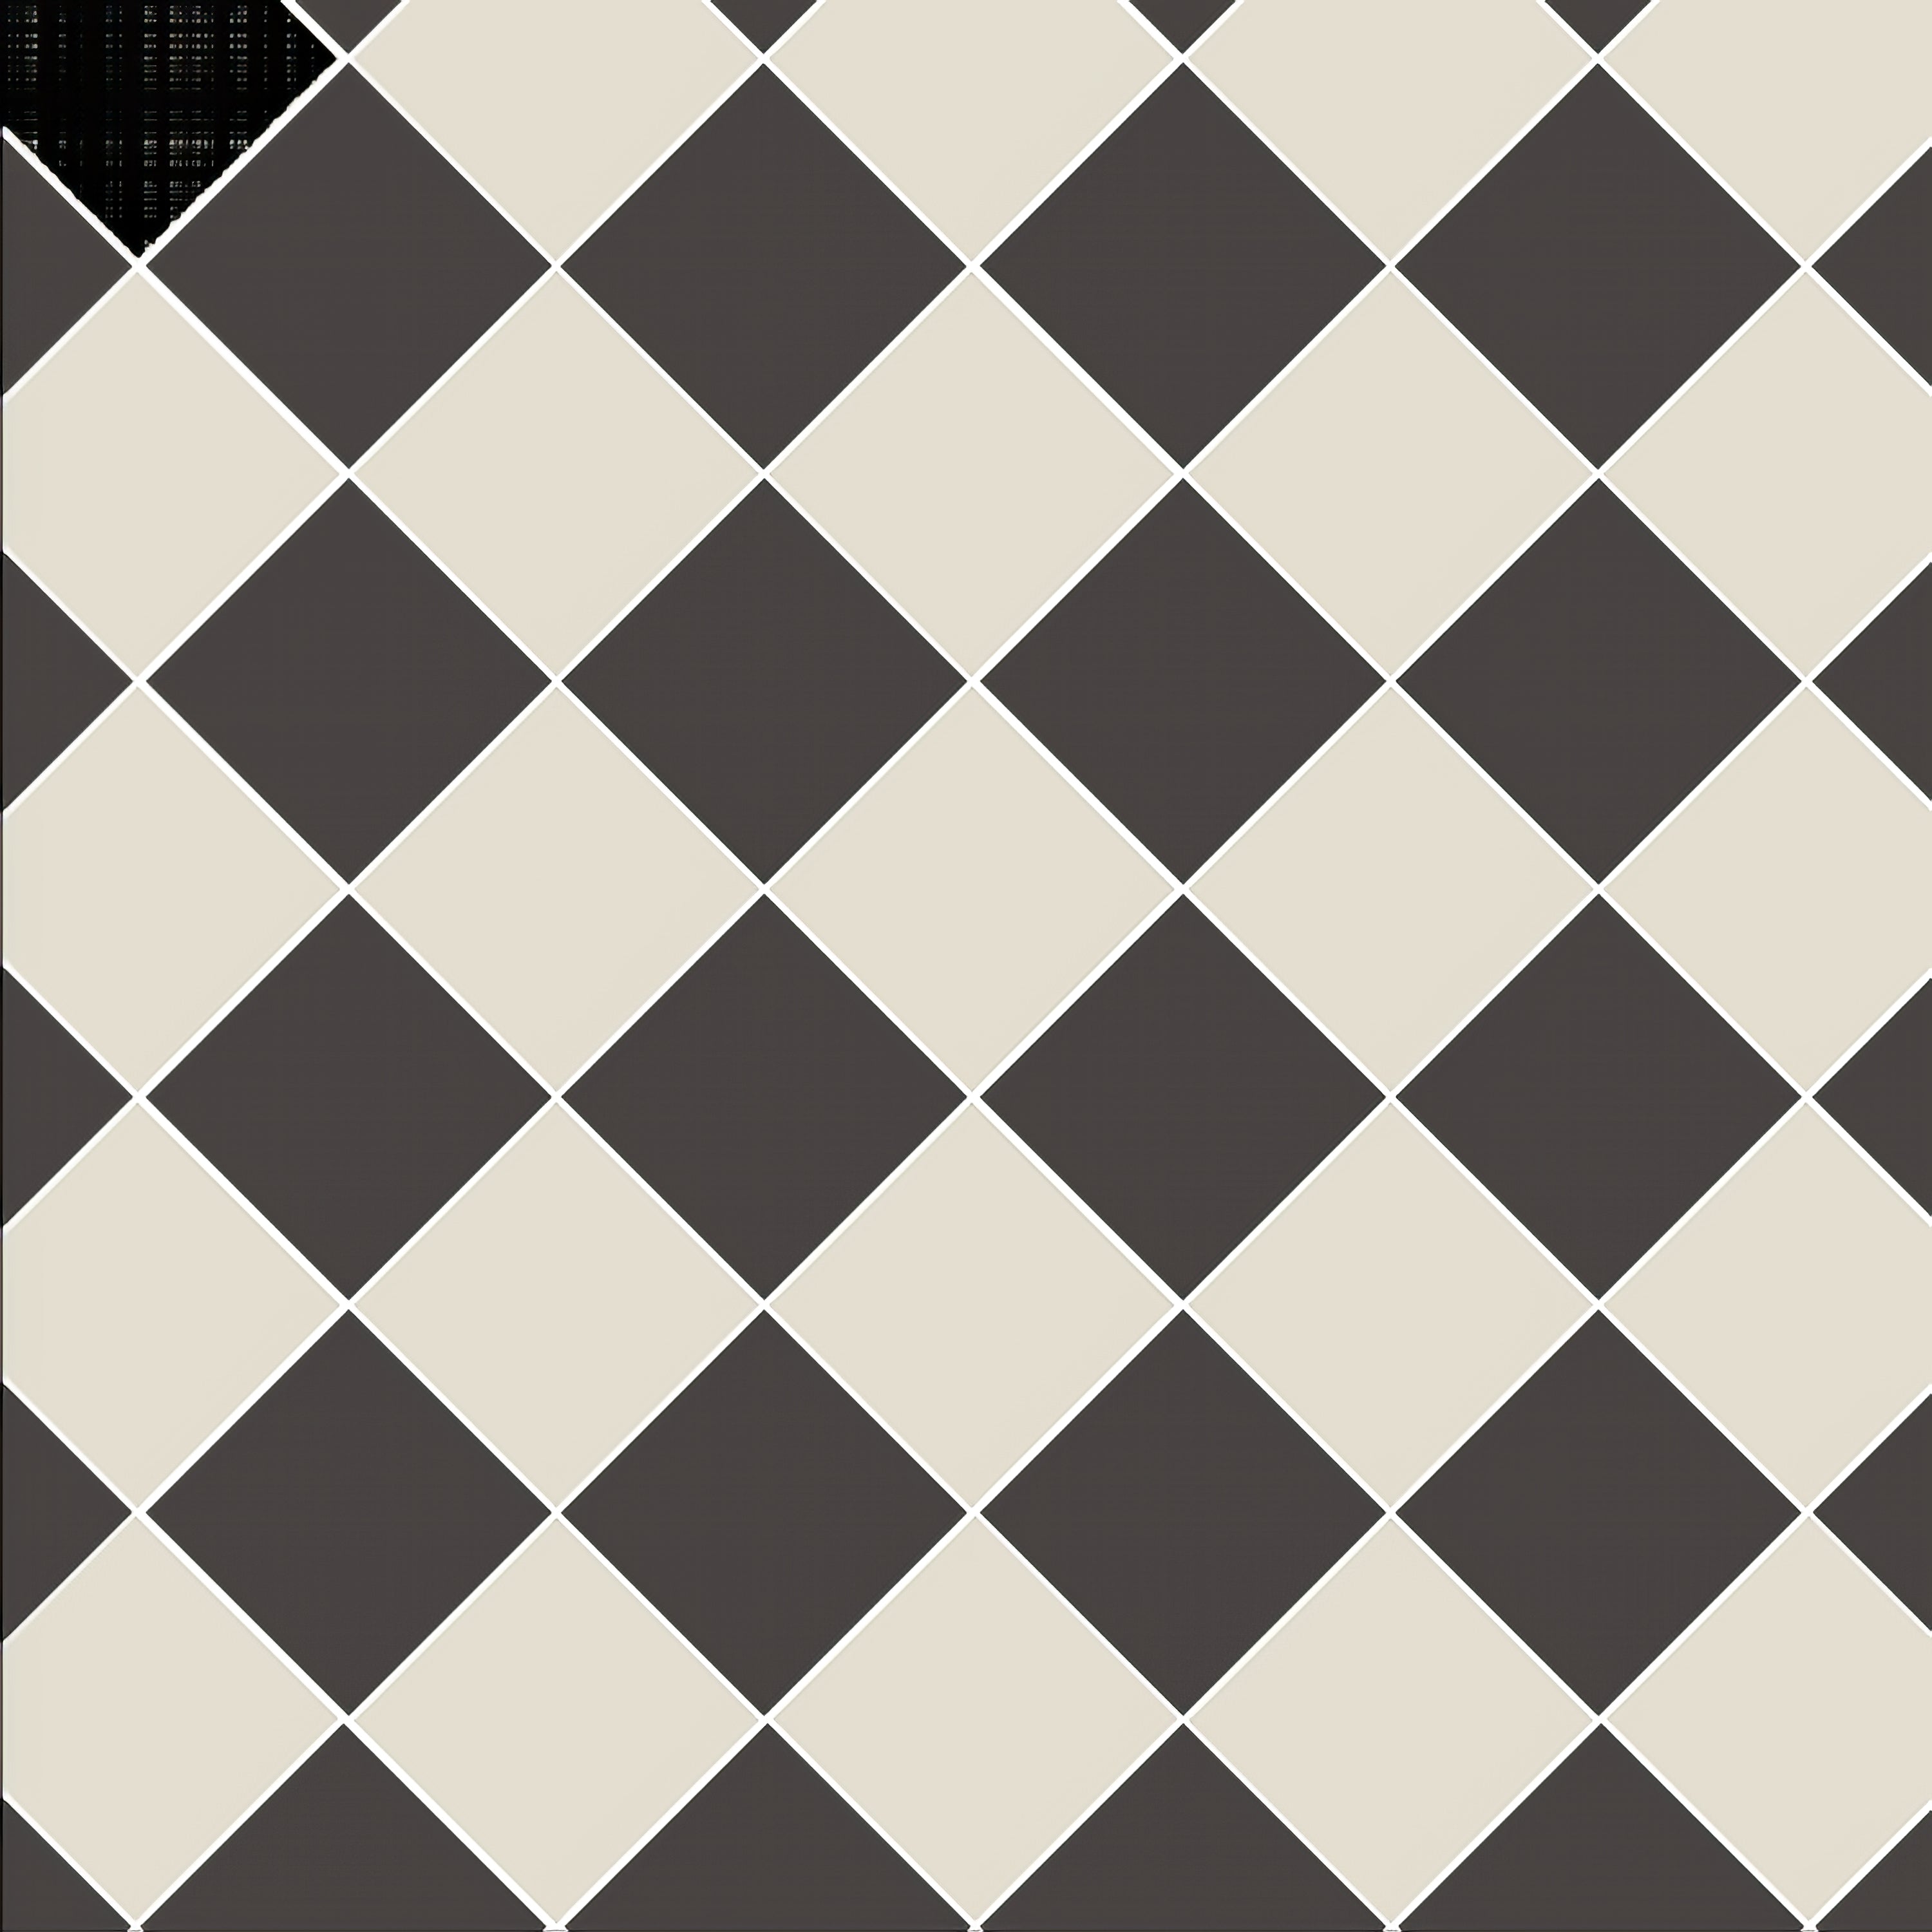 Oxford Black and White - Hyperion Tiles